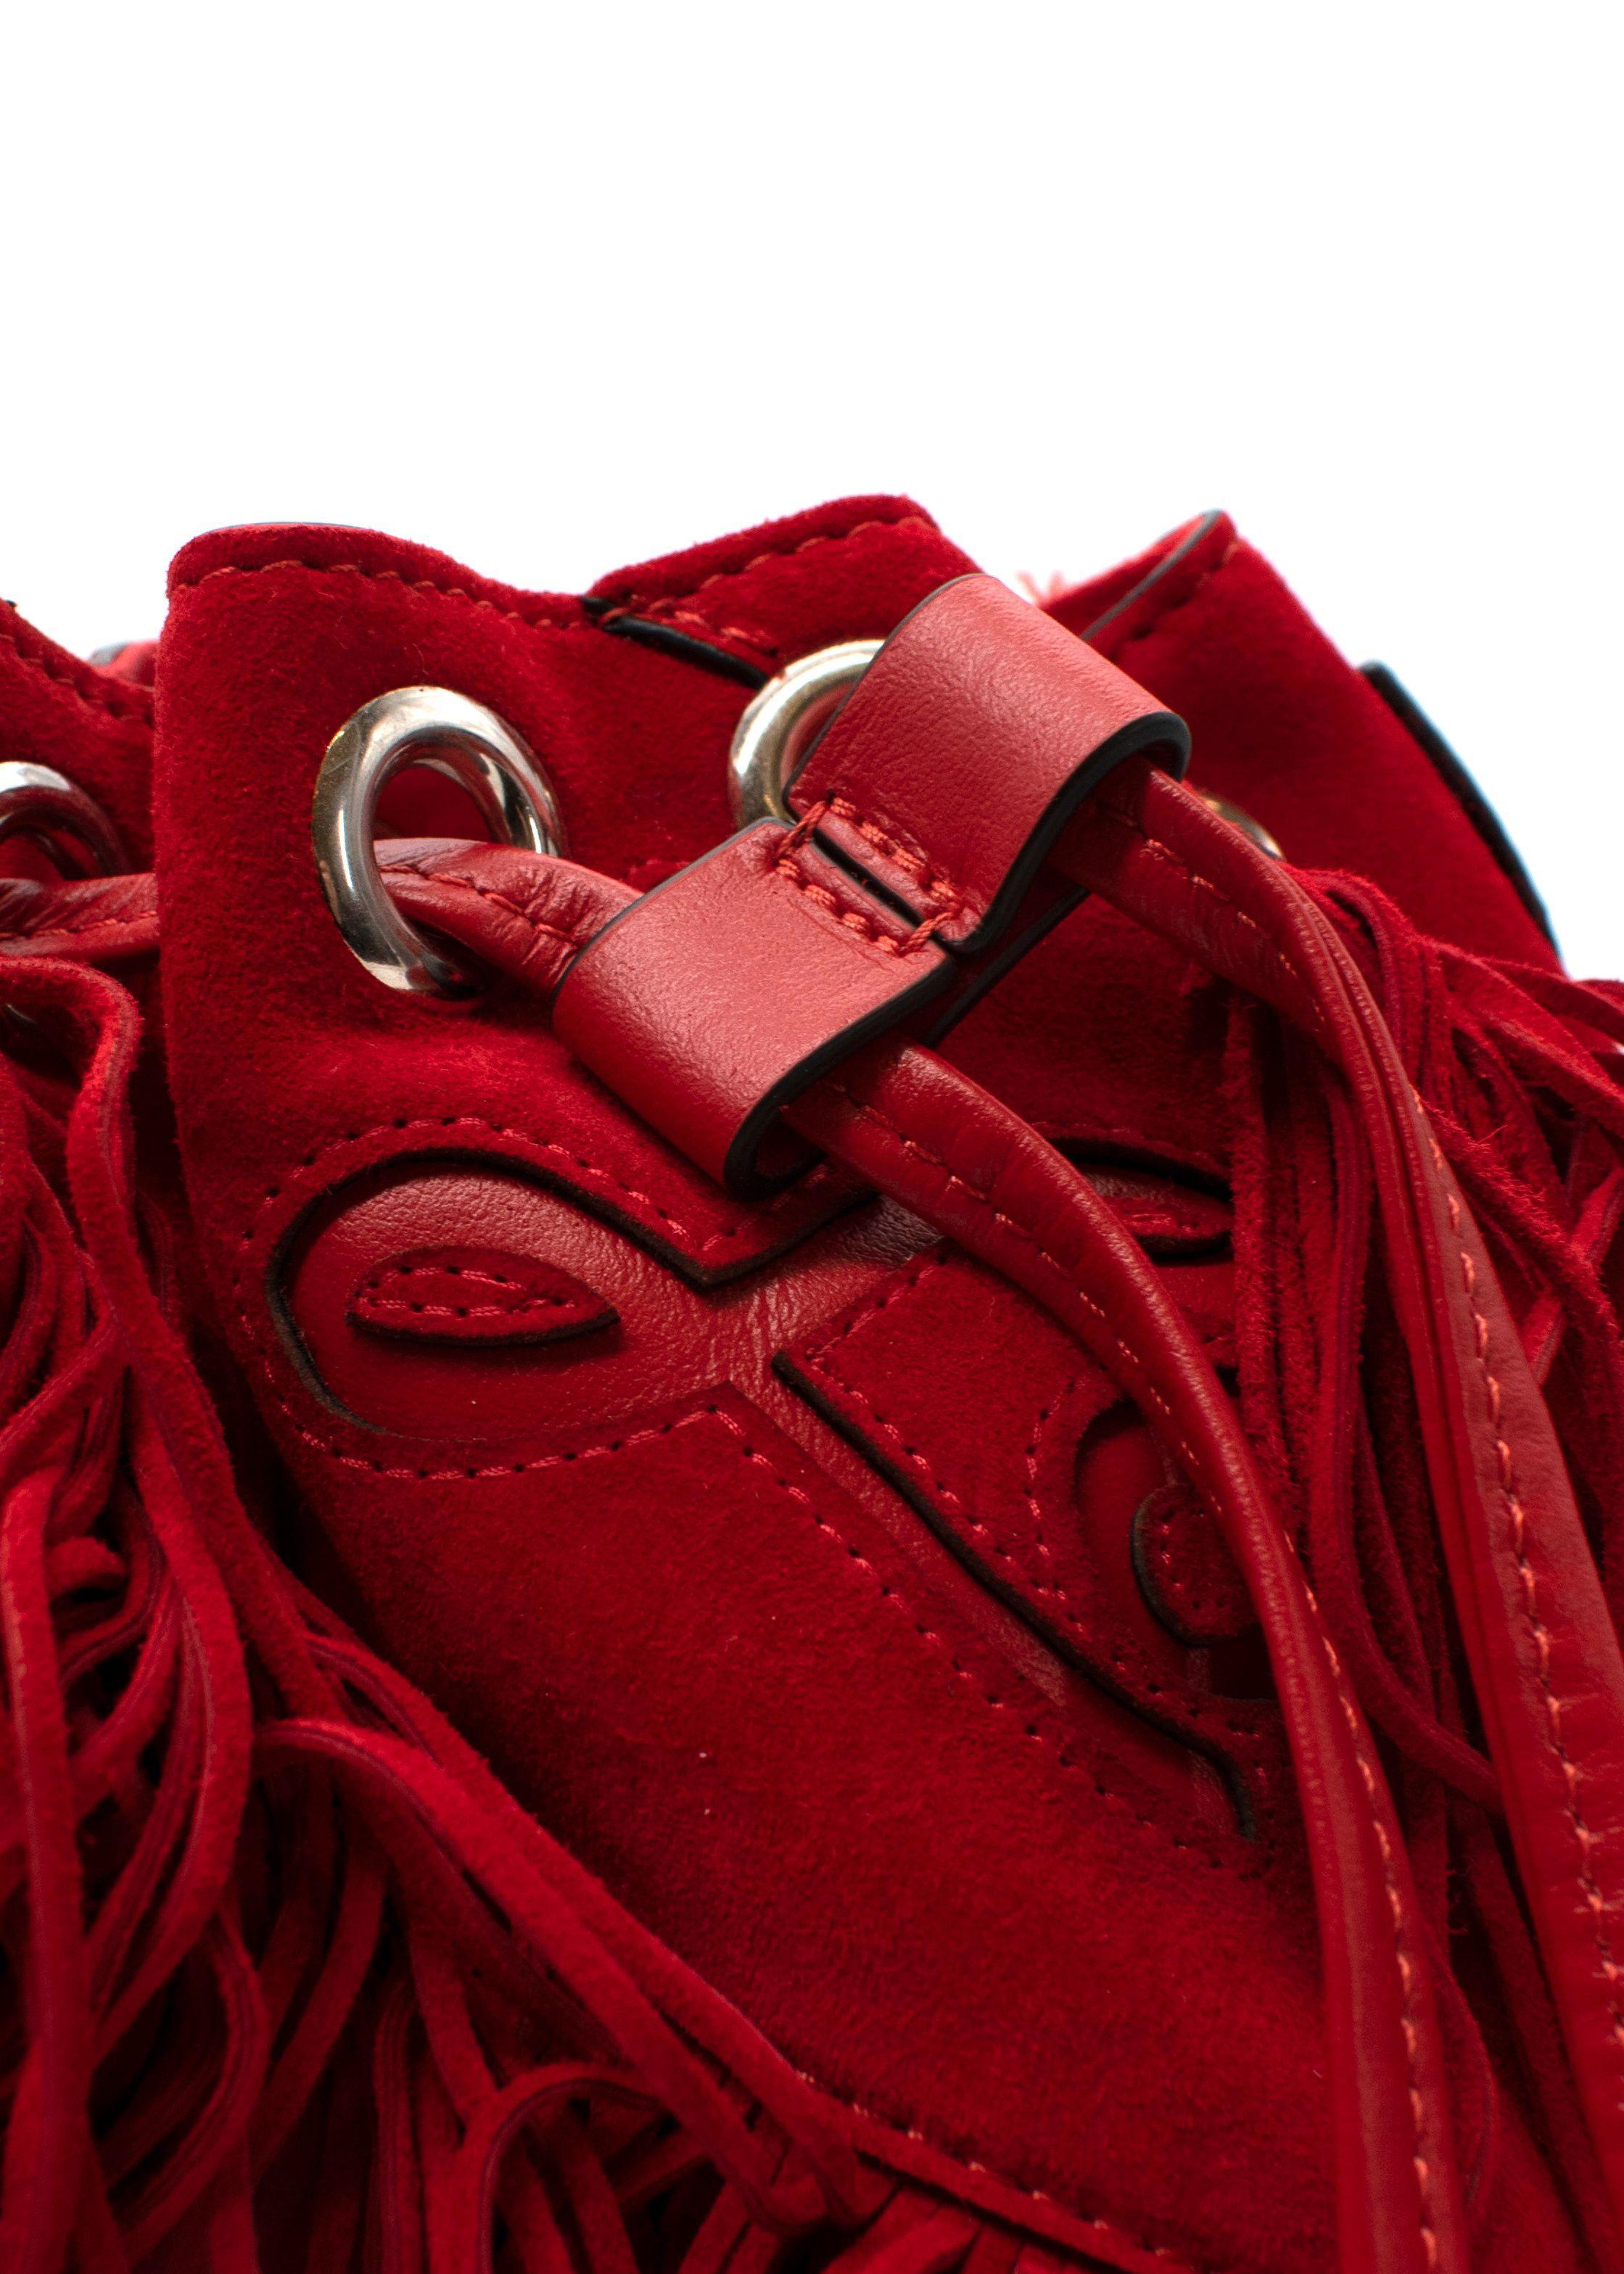 Women's Christian Louboutin Red Suede Marie Jane Fringed Bucket Bag For Sale